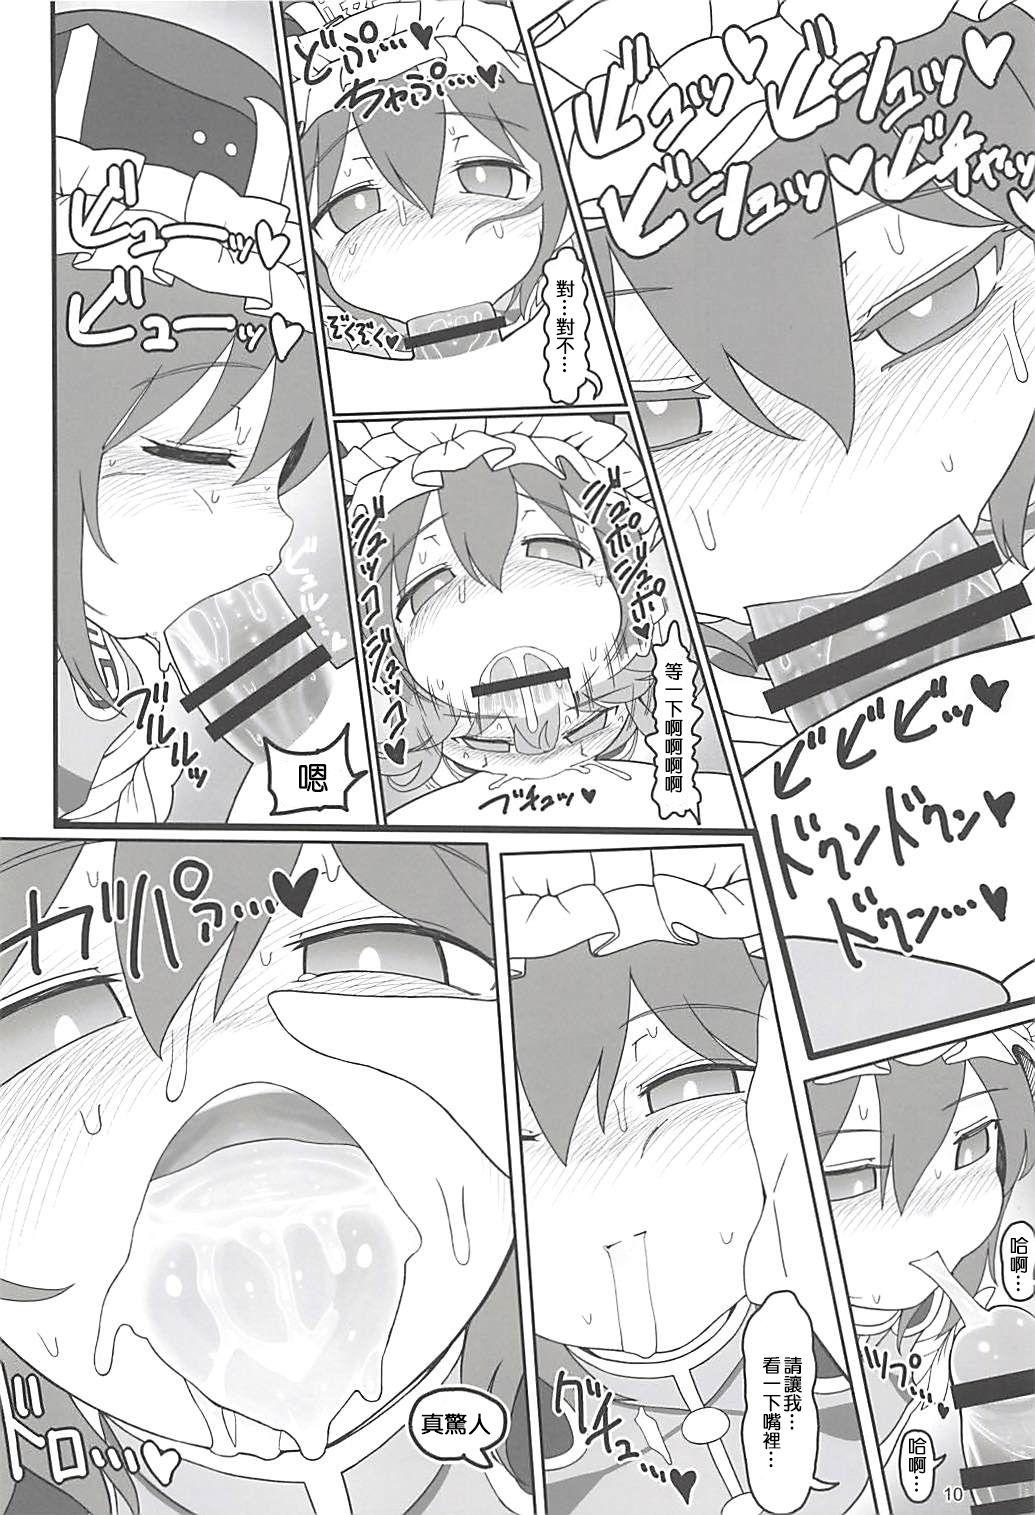 Sesso Enma Lover | 阎魔Lover - Touhou project Lesbian Porn - Page 9